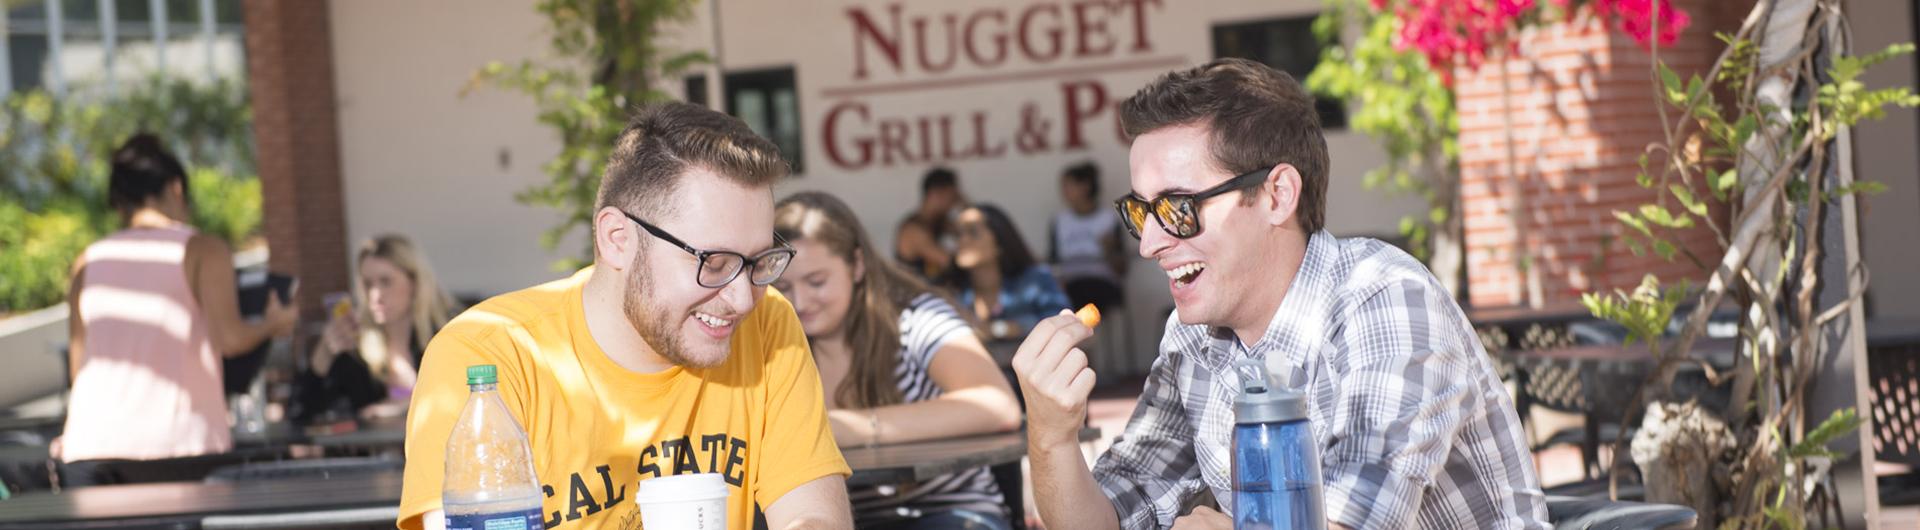 students eating at nugget grill 